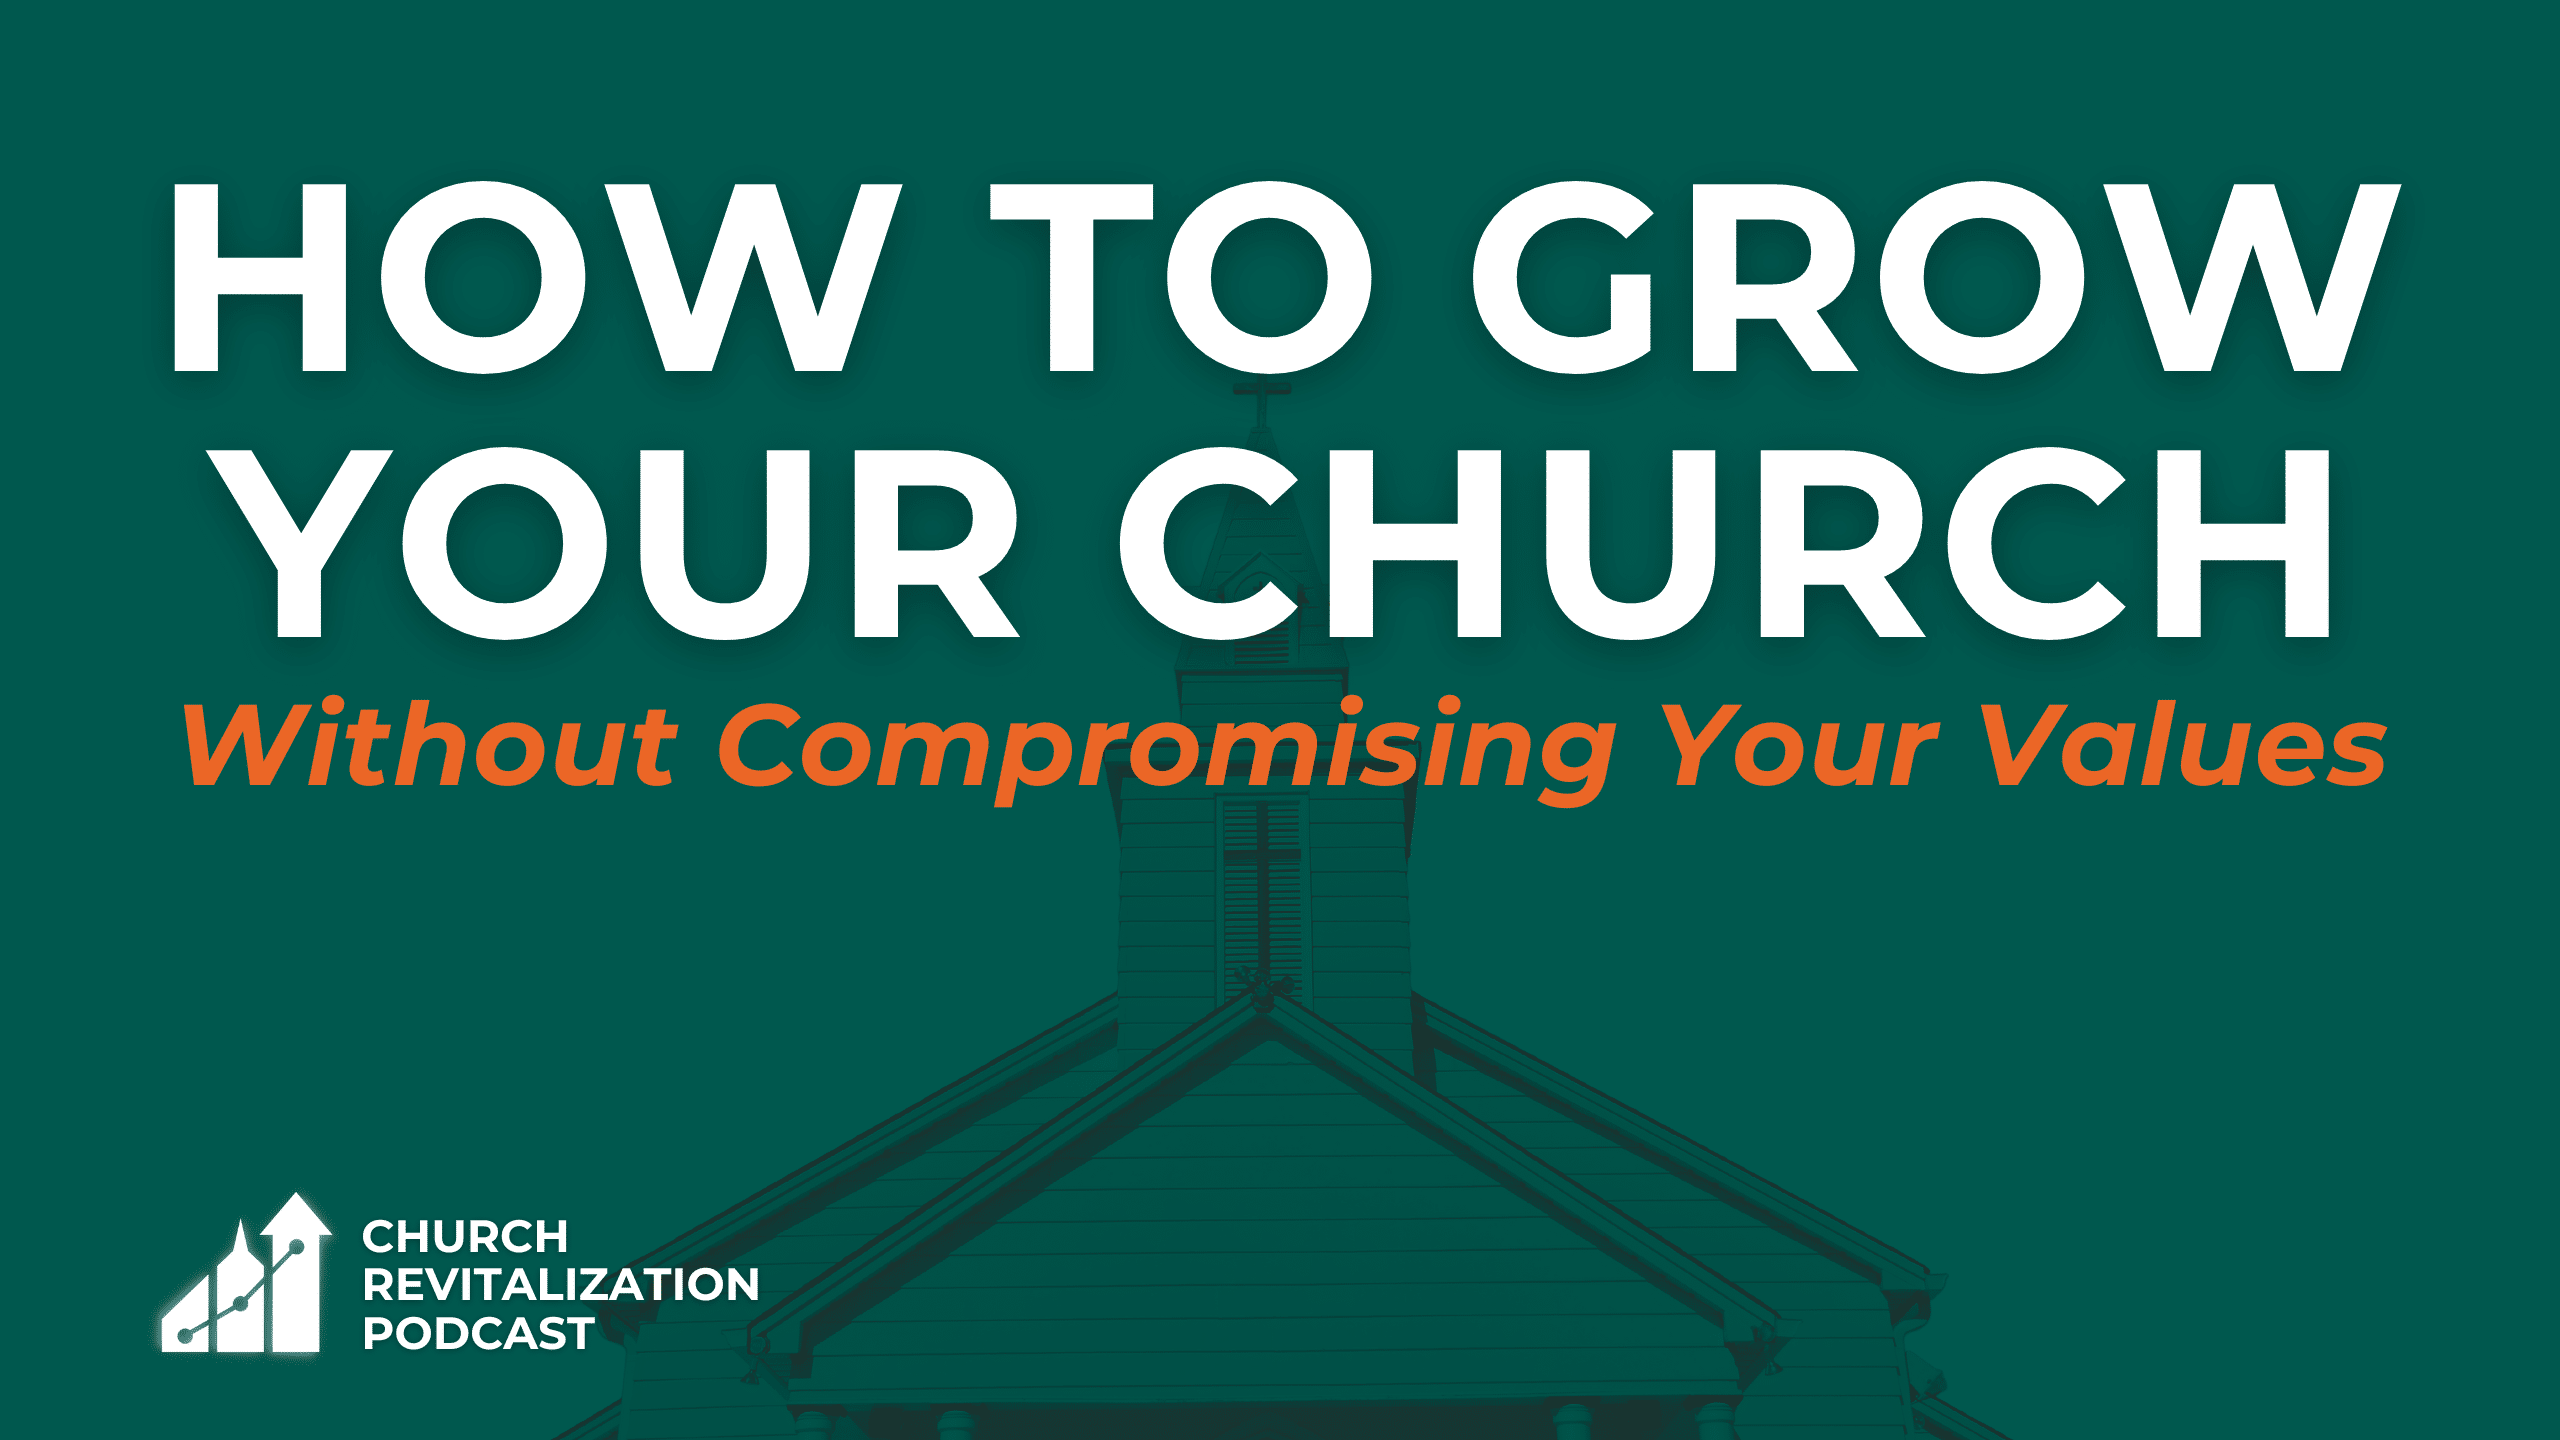 How to Grow Your Church Without Compromising Your Values